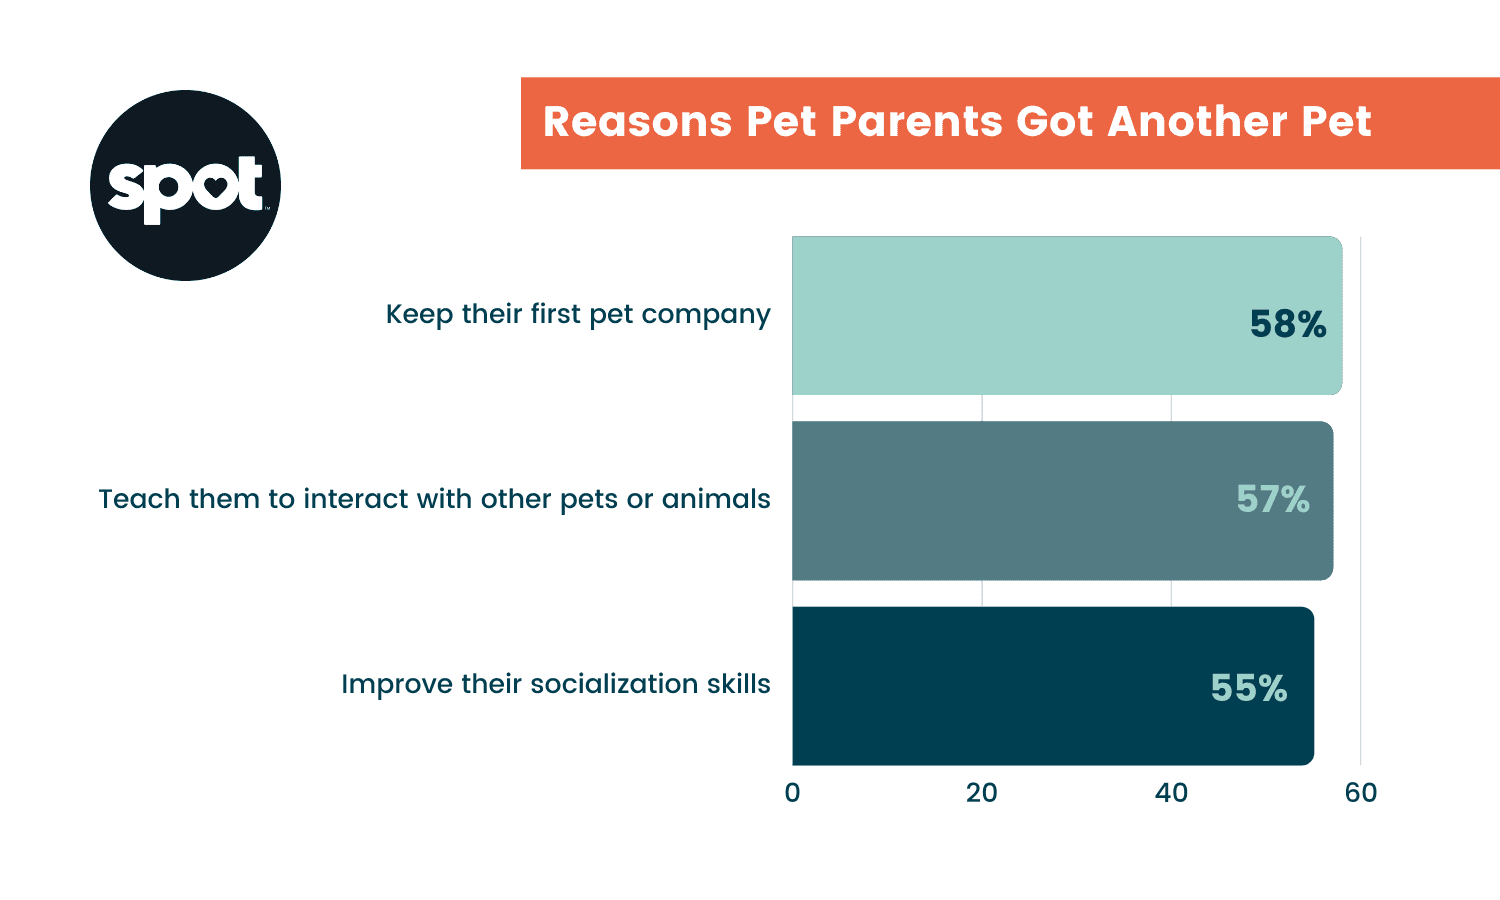 A bar graph titled "Reasons Pet Parents Got Another Pet" shows that the highest percentage is for keeping the first pet company.